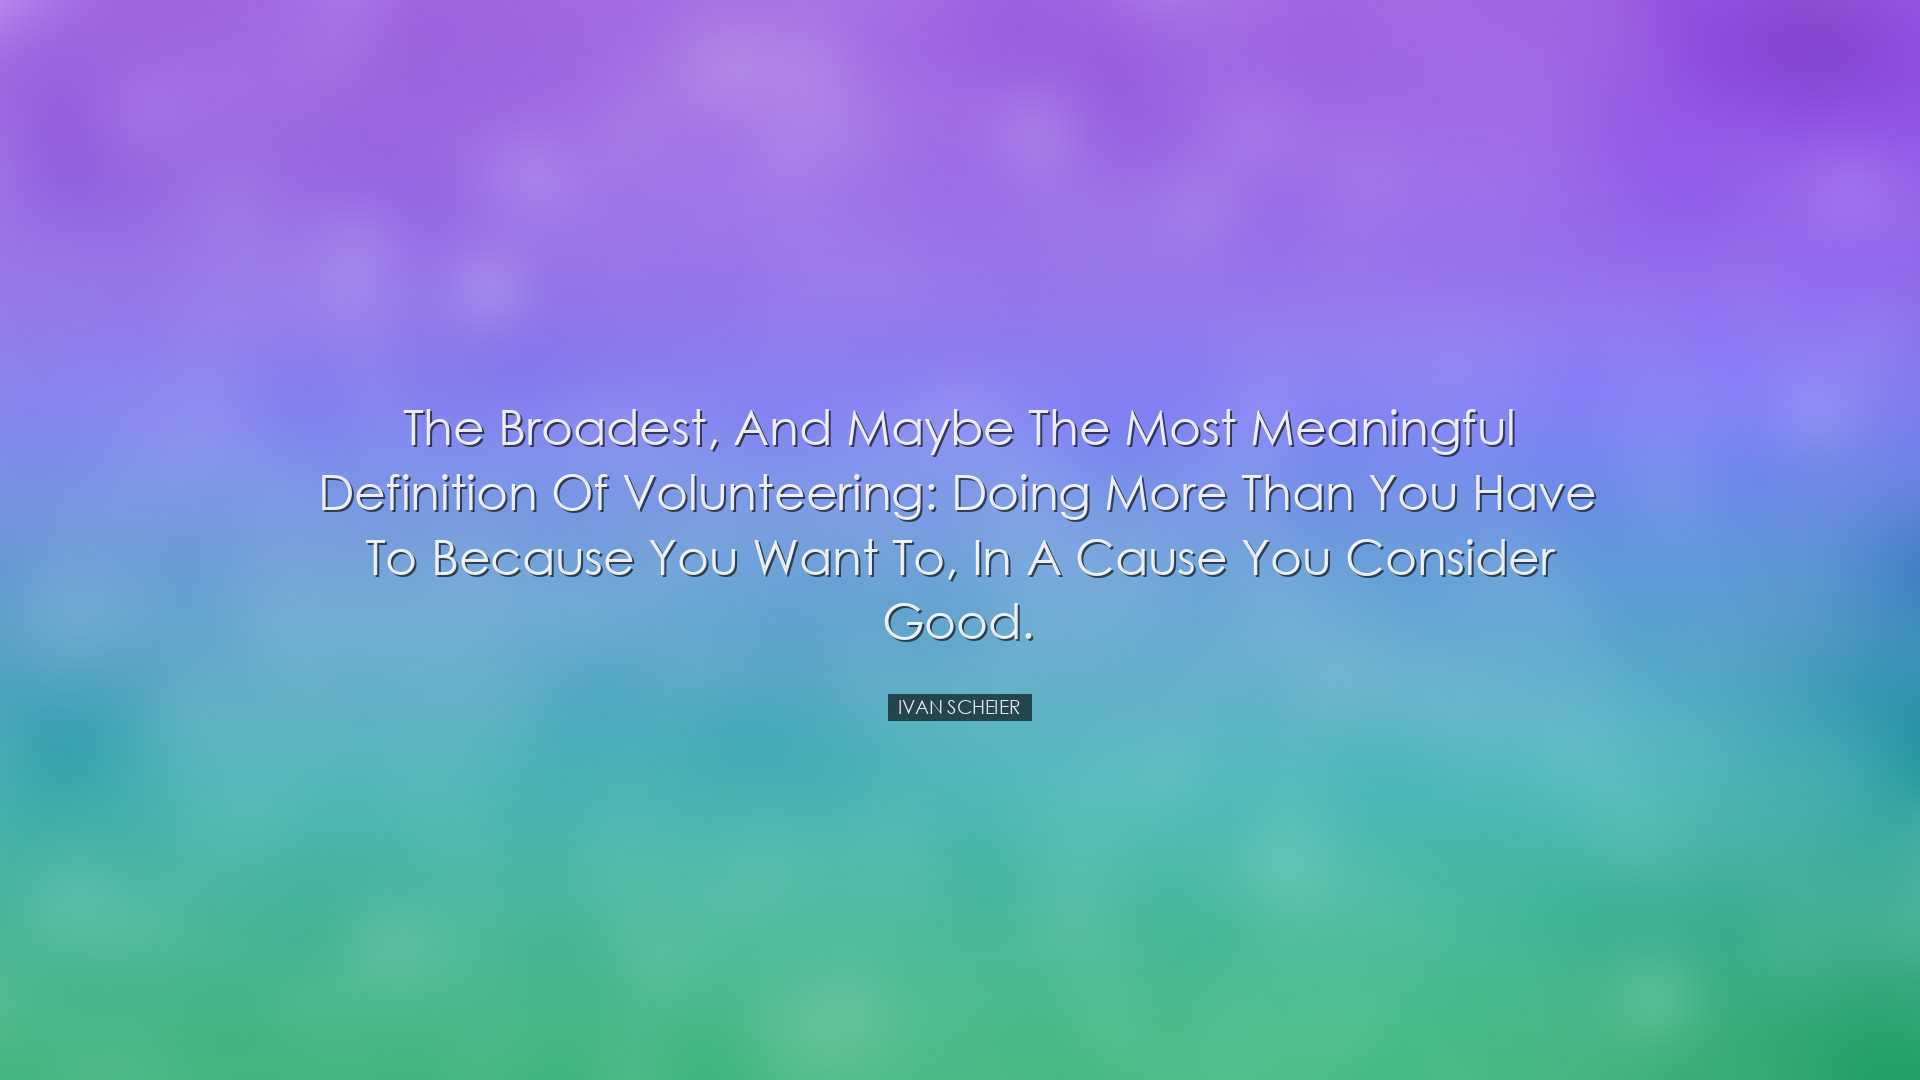 The broadest, and maybe the most meaningful definition of voluntee